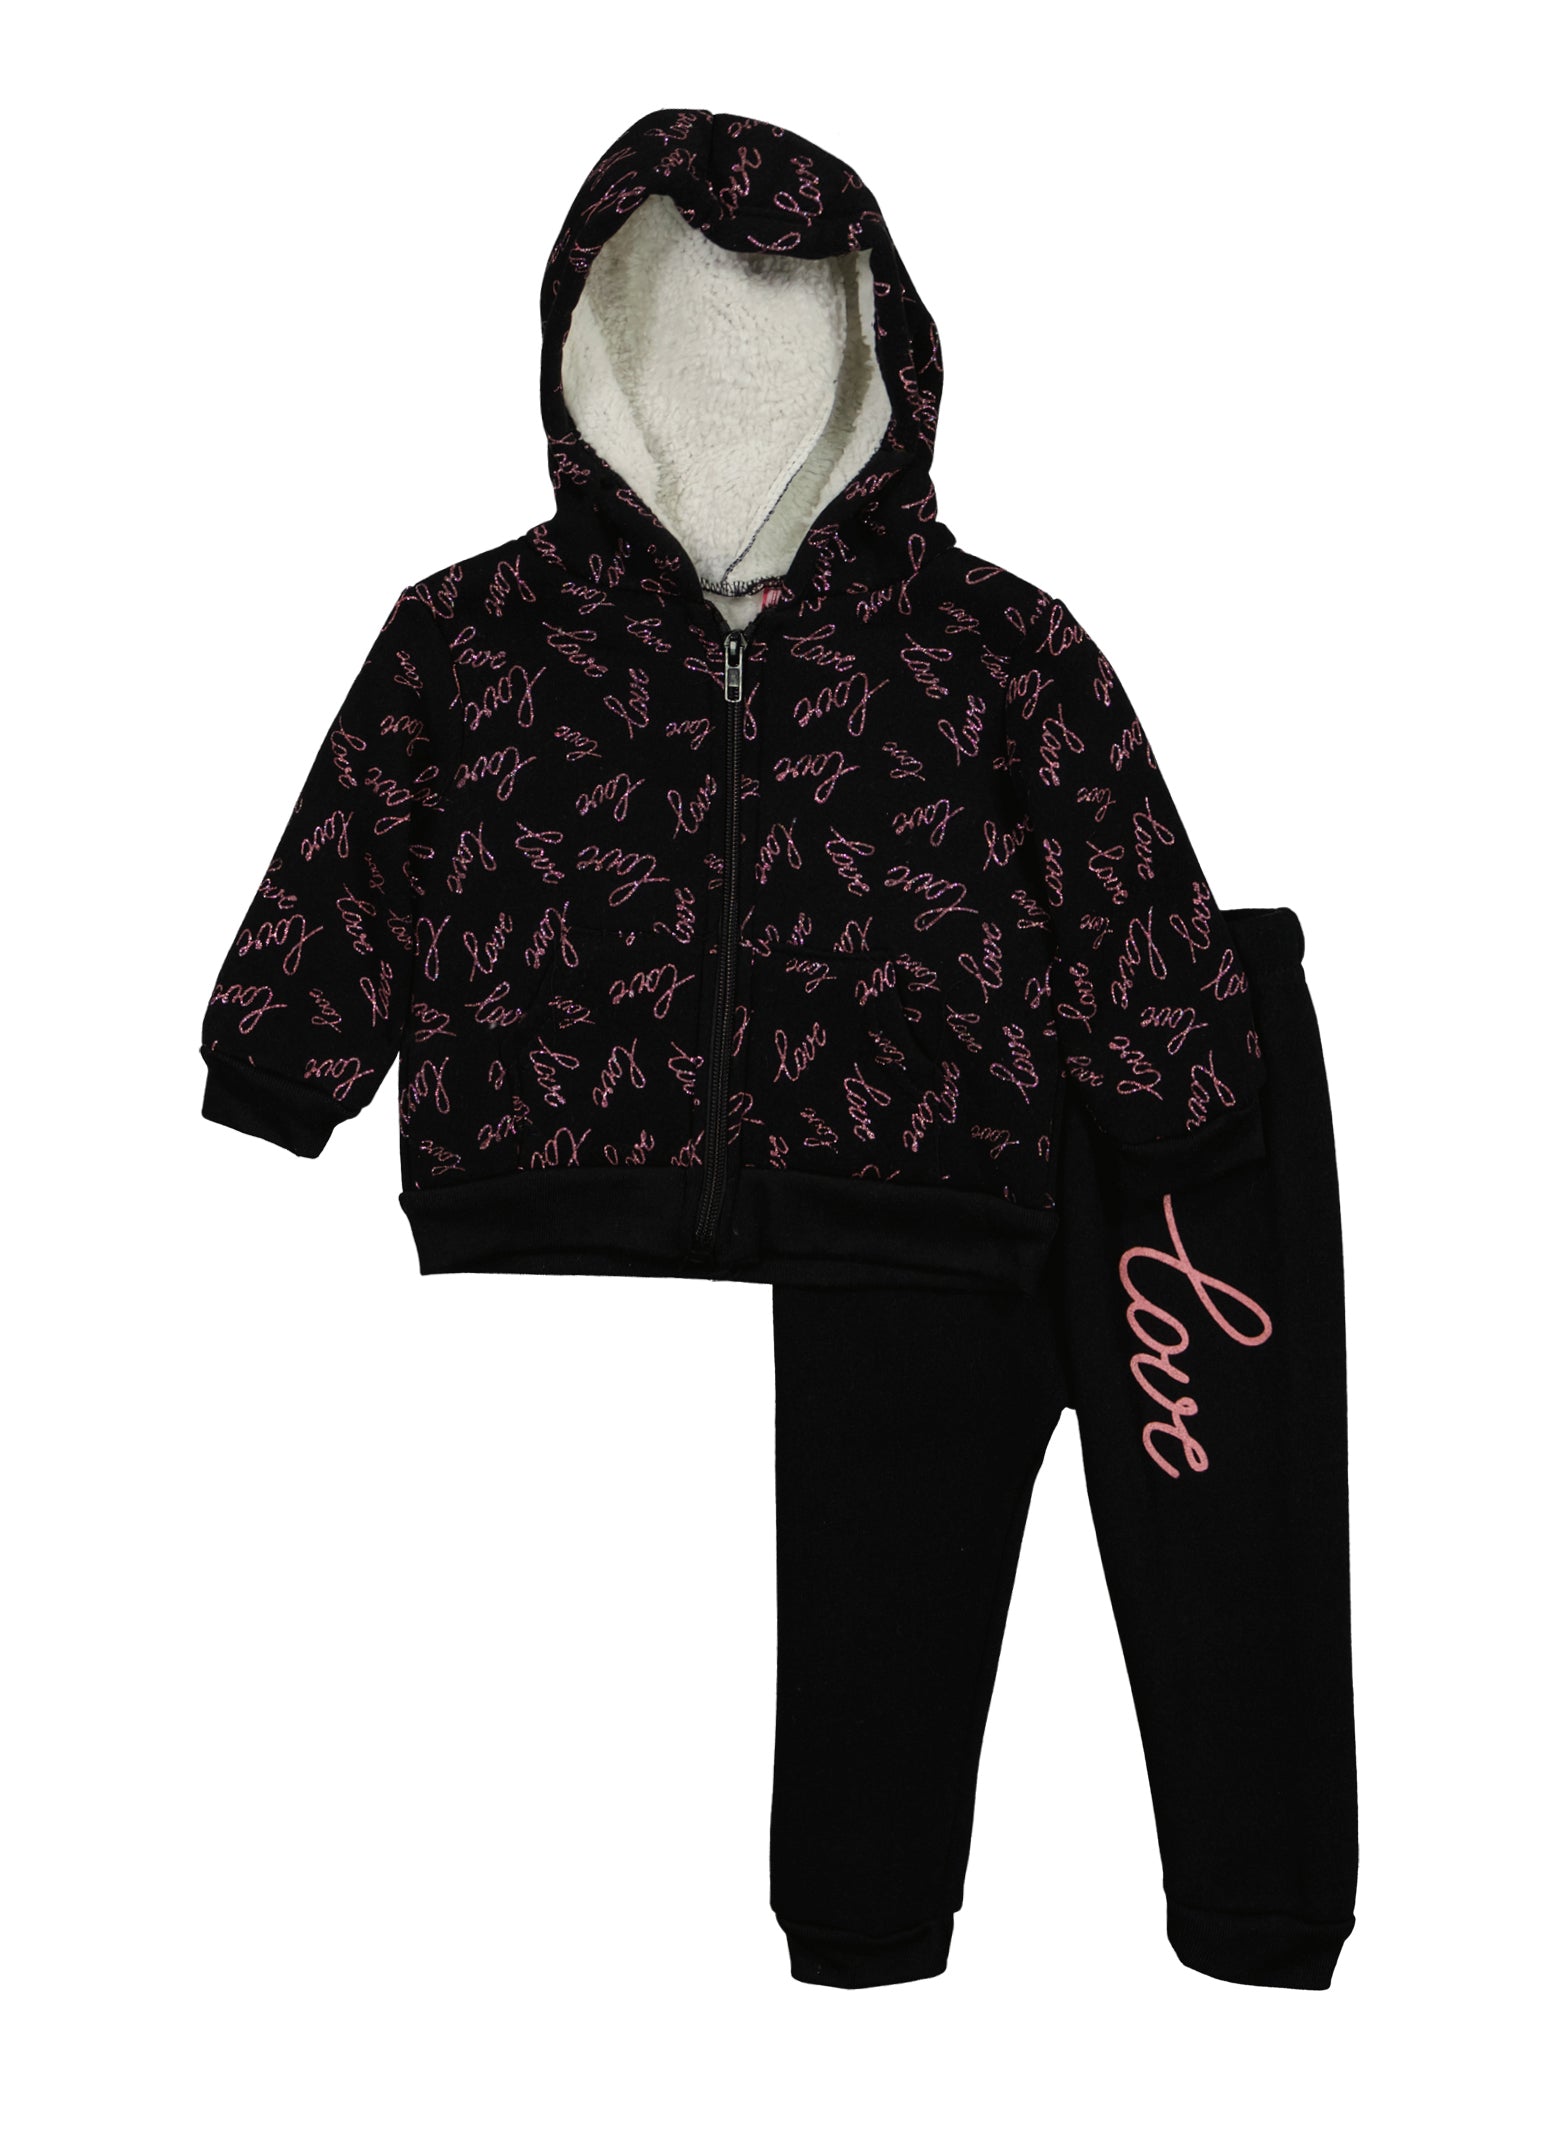 Baby Girls 12-24M Love Printed Zip Front Hoodie and Joggers, Black, Size 12M